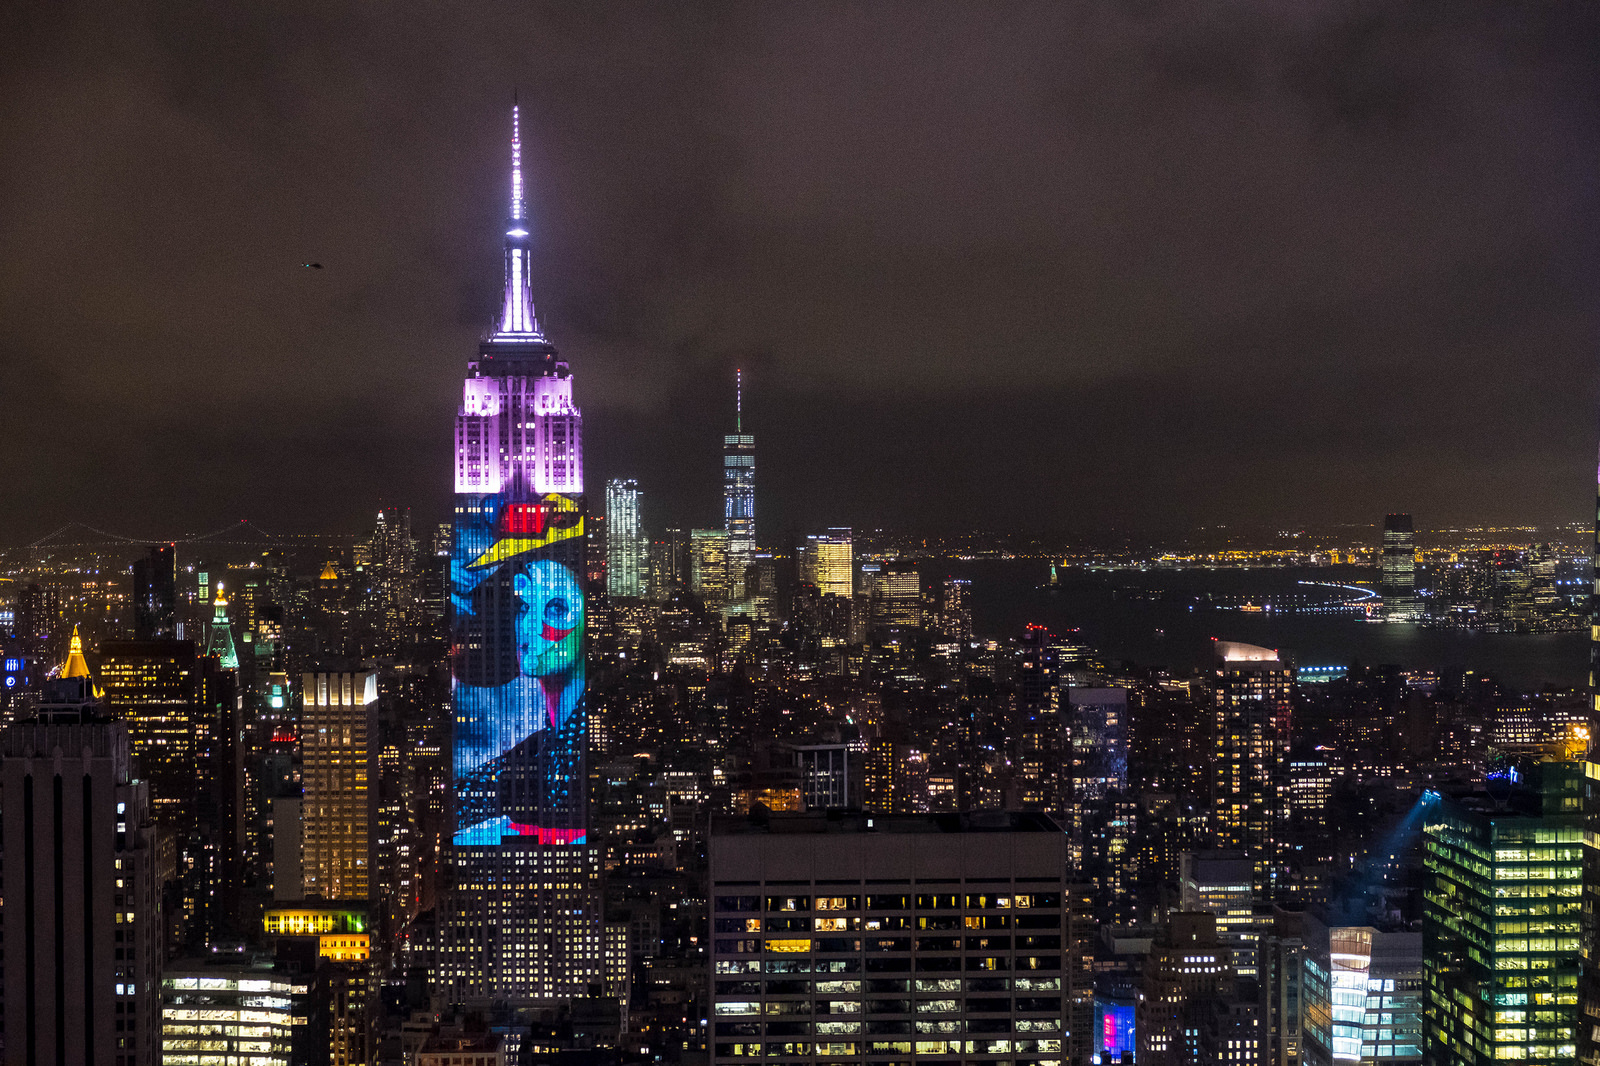 Harper’s Projected 150 Iconic Fashion Photos Onto the Empire State Building.